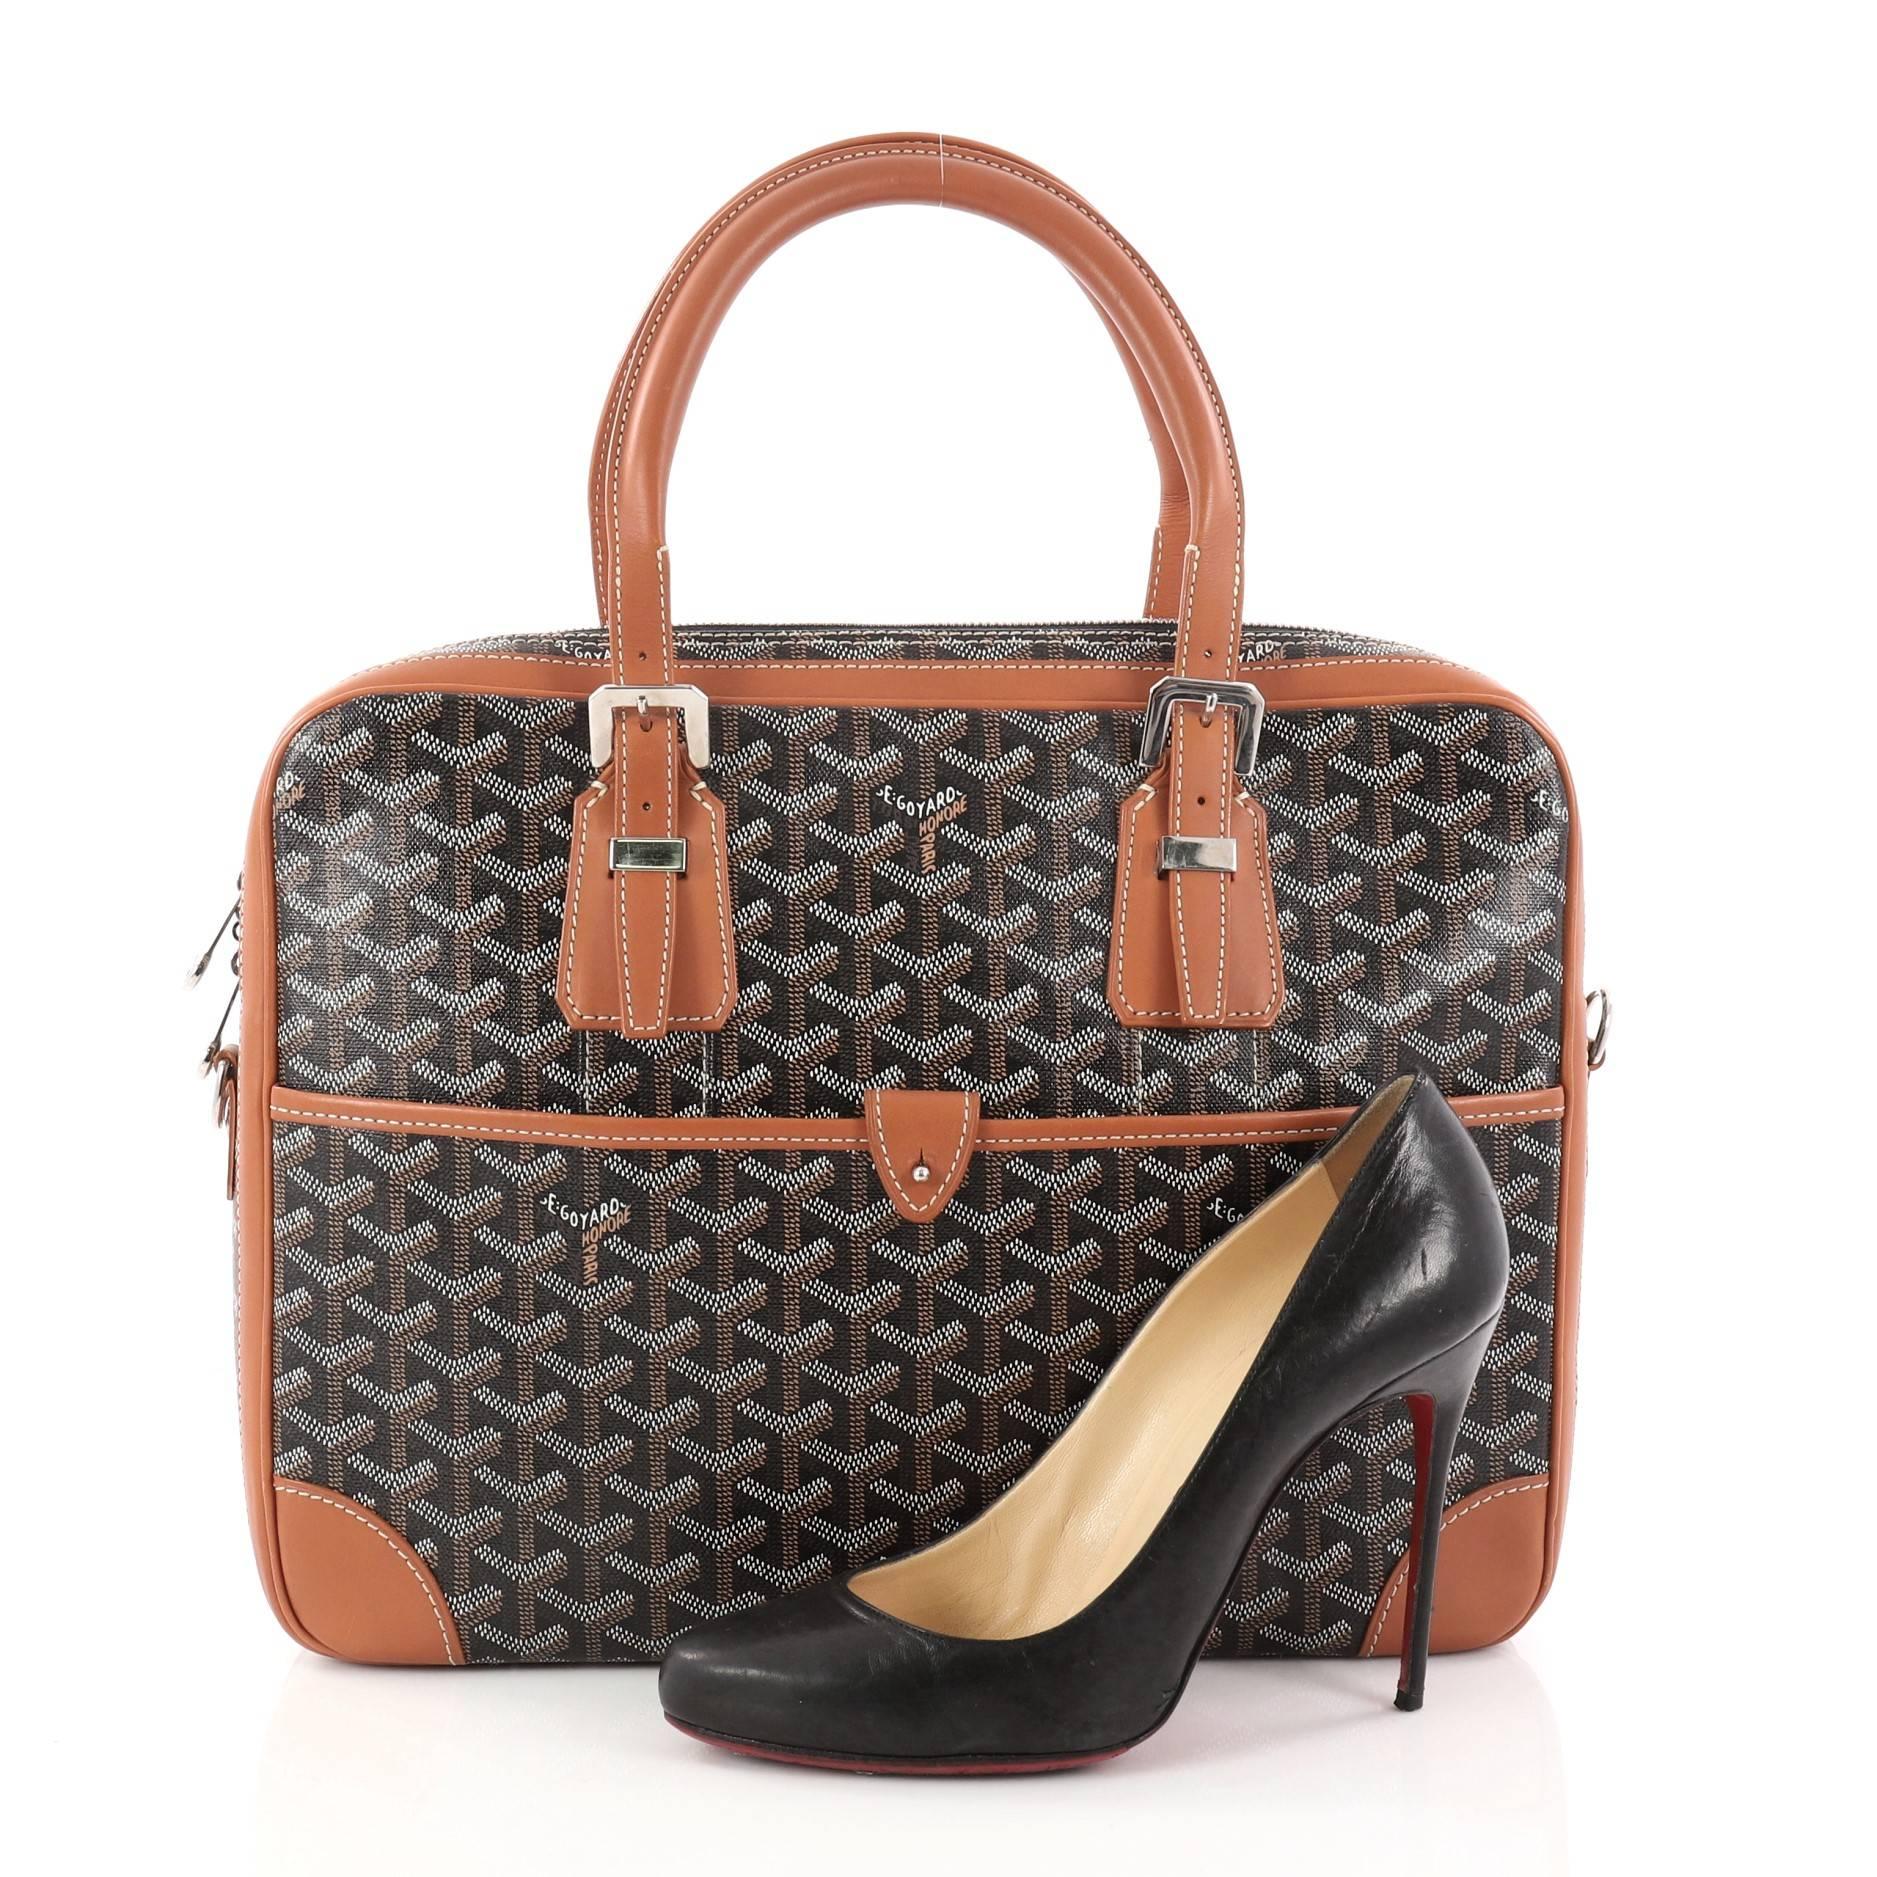 This authentic Goyard Ambassade Briefcase Coated Canvas MM is a chic and functional work-travel accessory made for stylish professionals. Crafted from black coated canvas with brown leather trims, this briefcase features dual-rolled leather handles